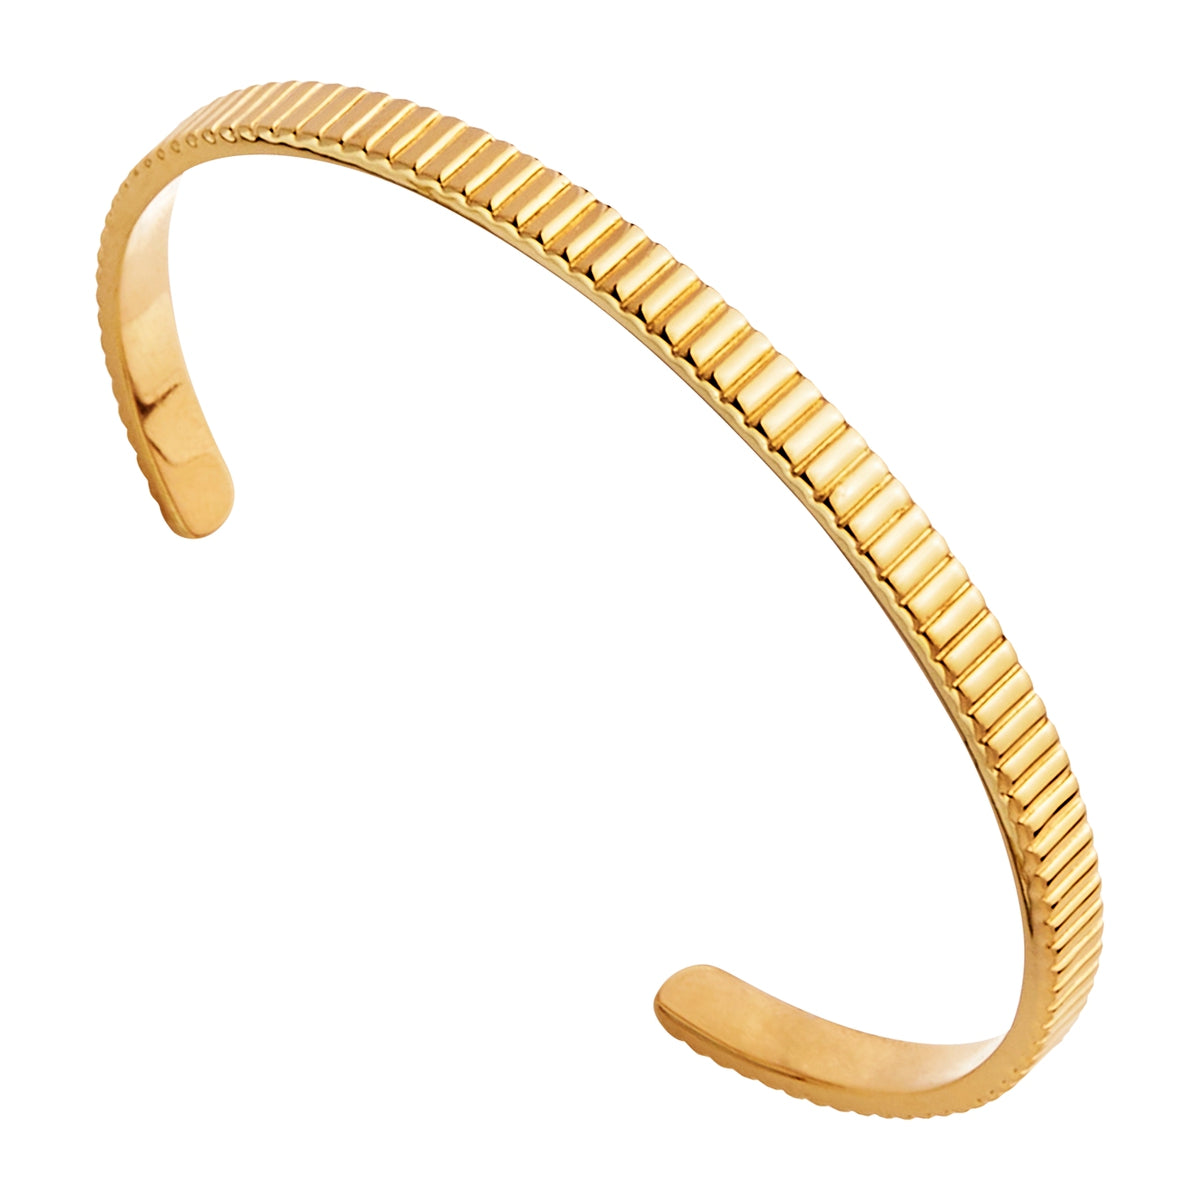 Solid Silver, Yellow Gold Plated, Ridged Pattern Cuff With Rounded Ends, 60mm,